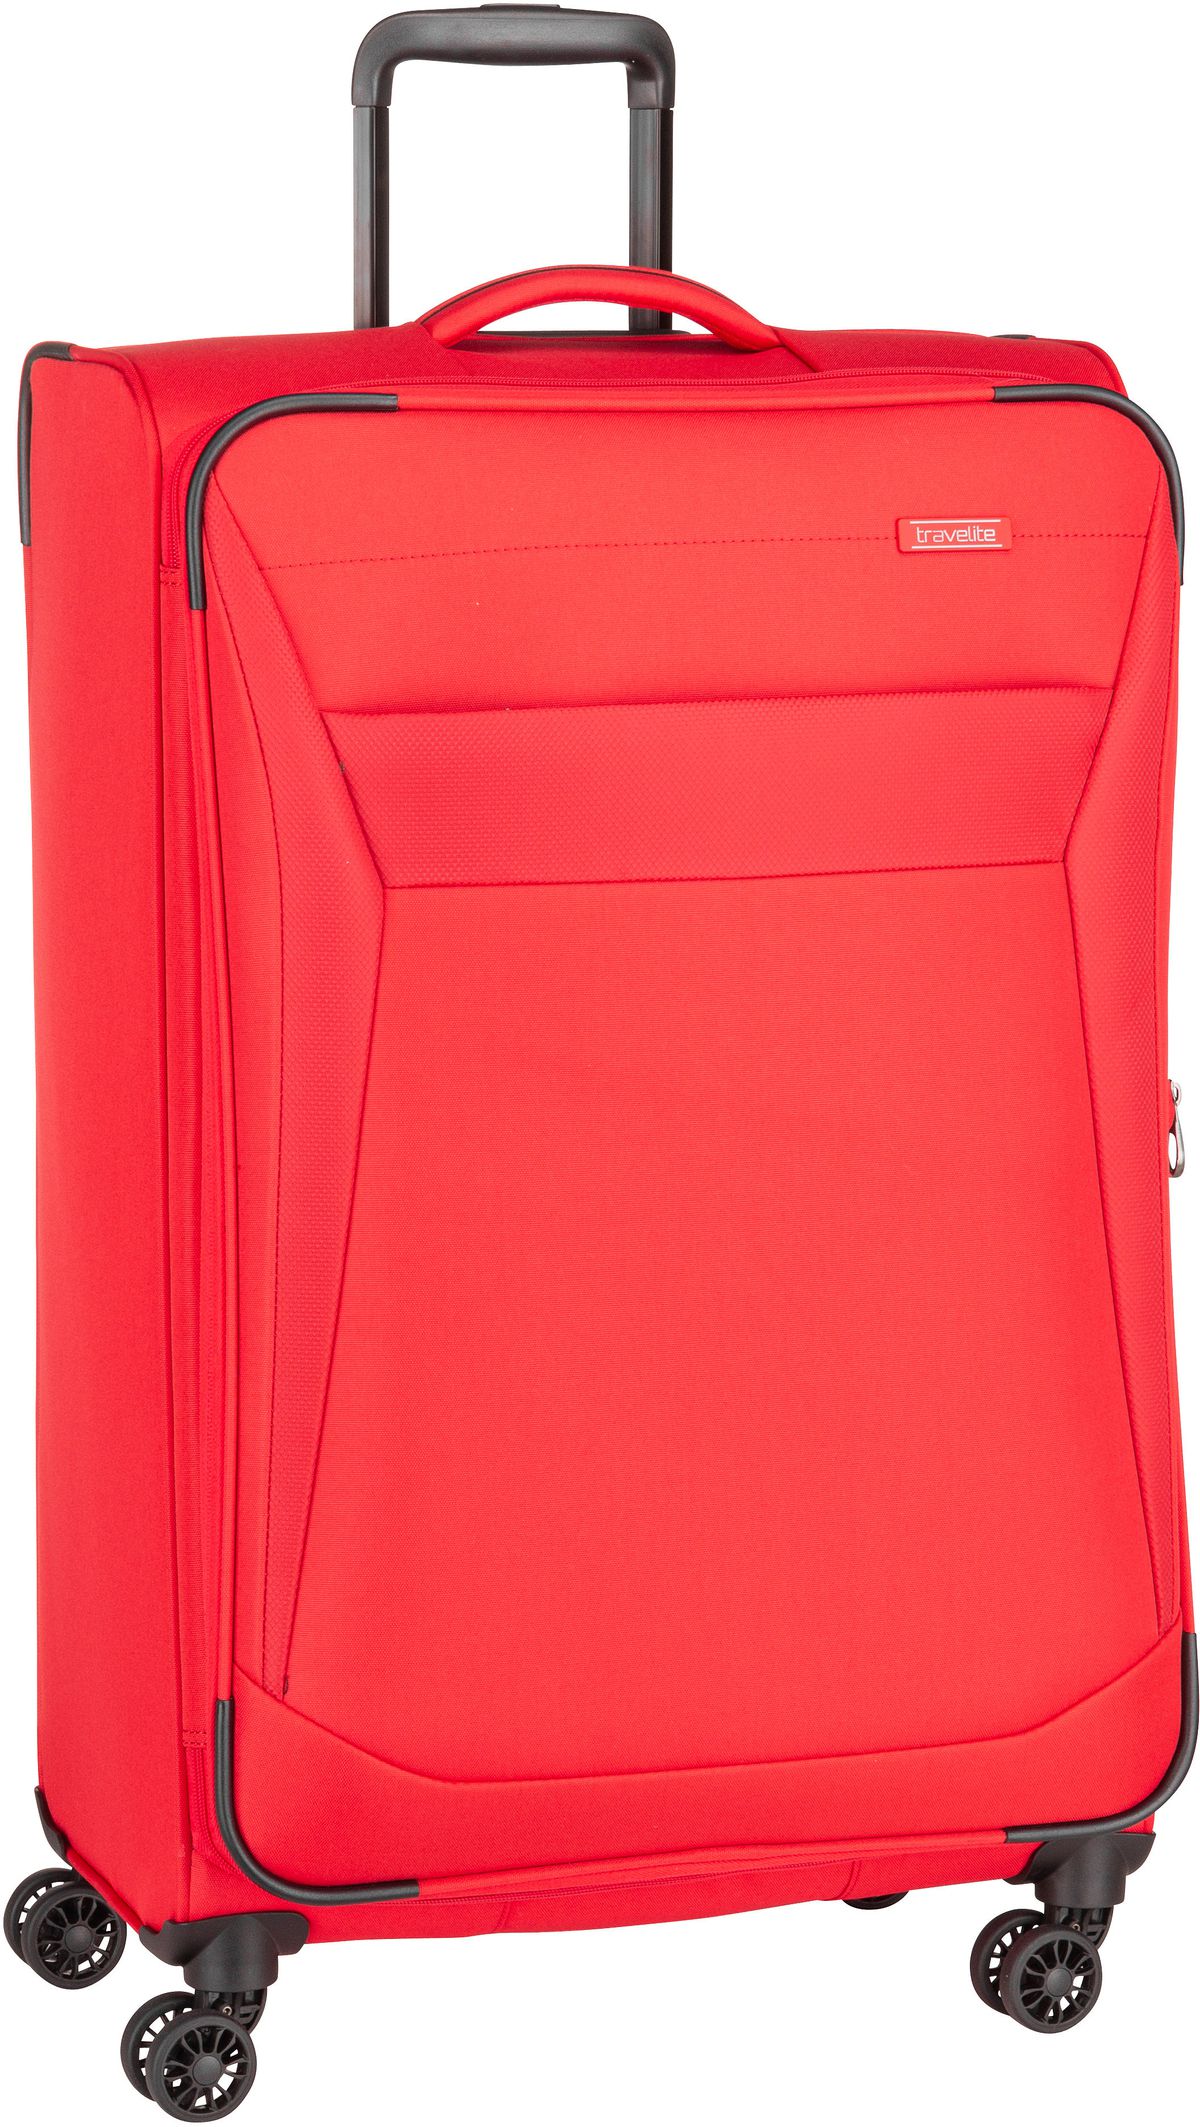 travelite Chios 4w Trolley L  in Rot (90 Liter), Koffer & Trolley